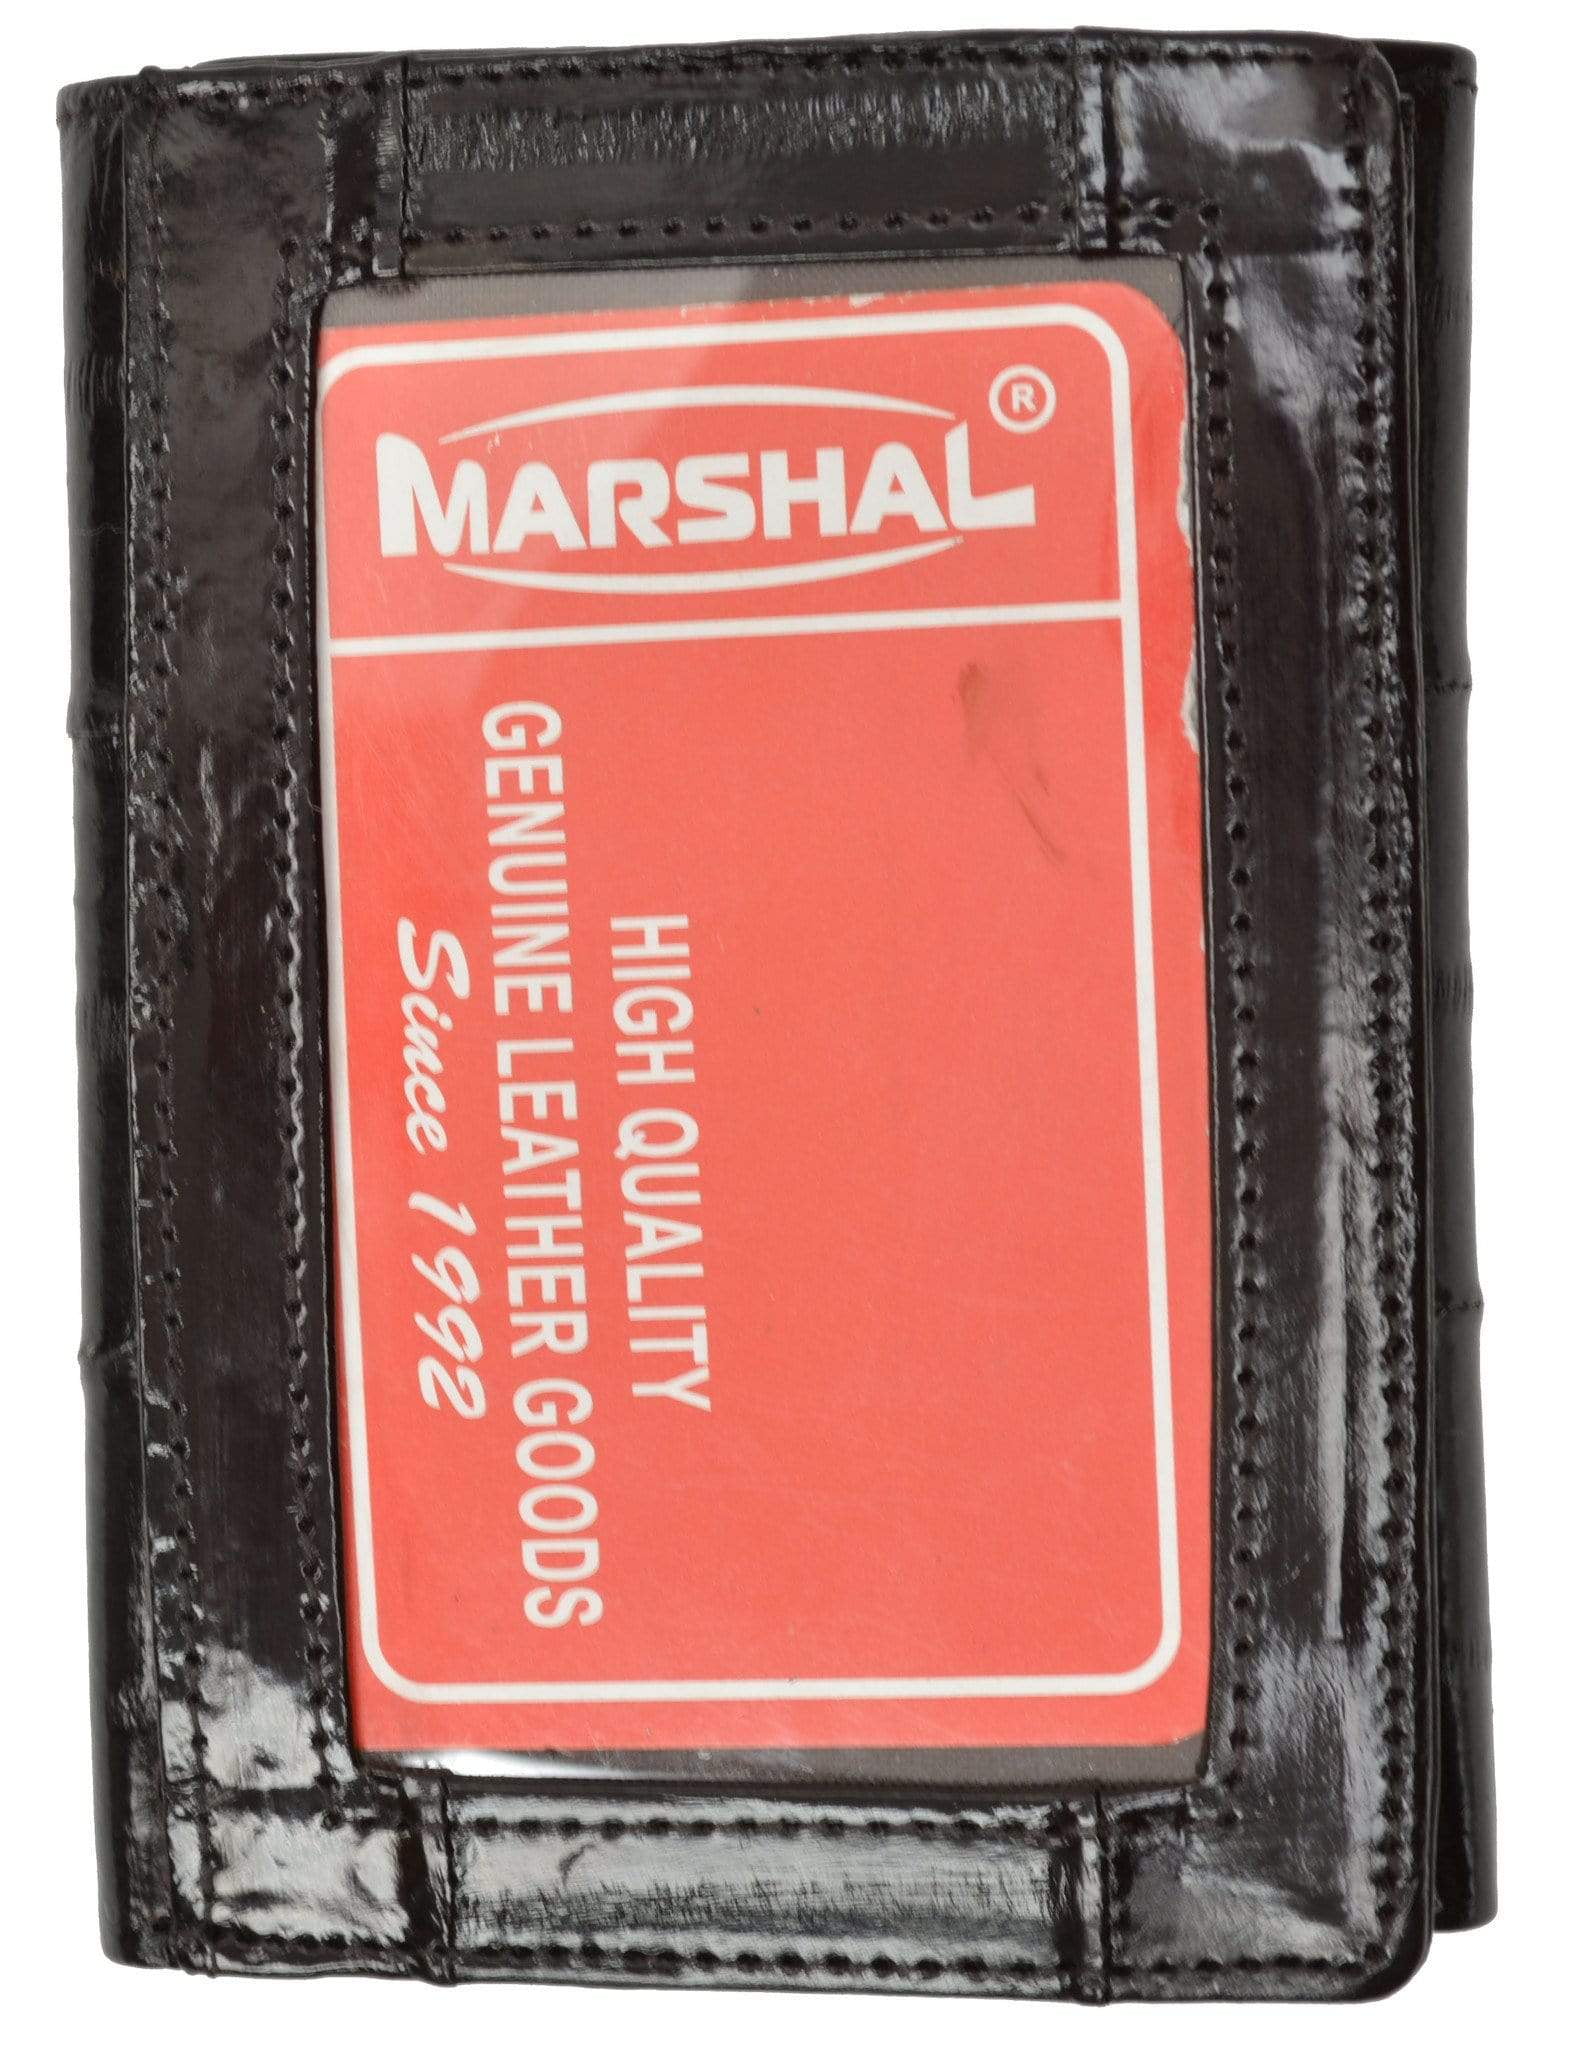 Marshal Eel Skin Soft Leather Bifold Wallet with Center Money Clip E 717, Men's, Red